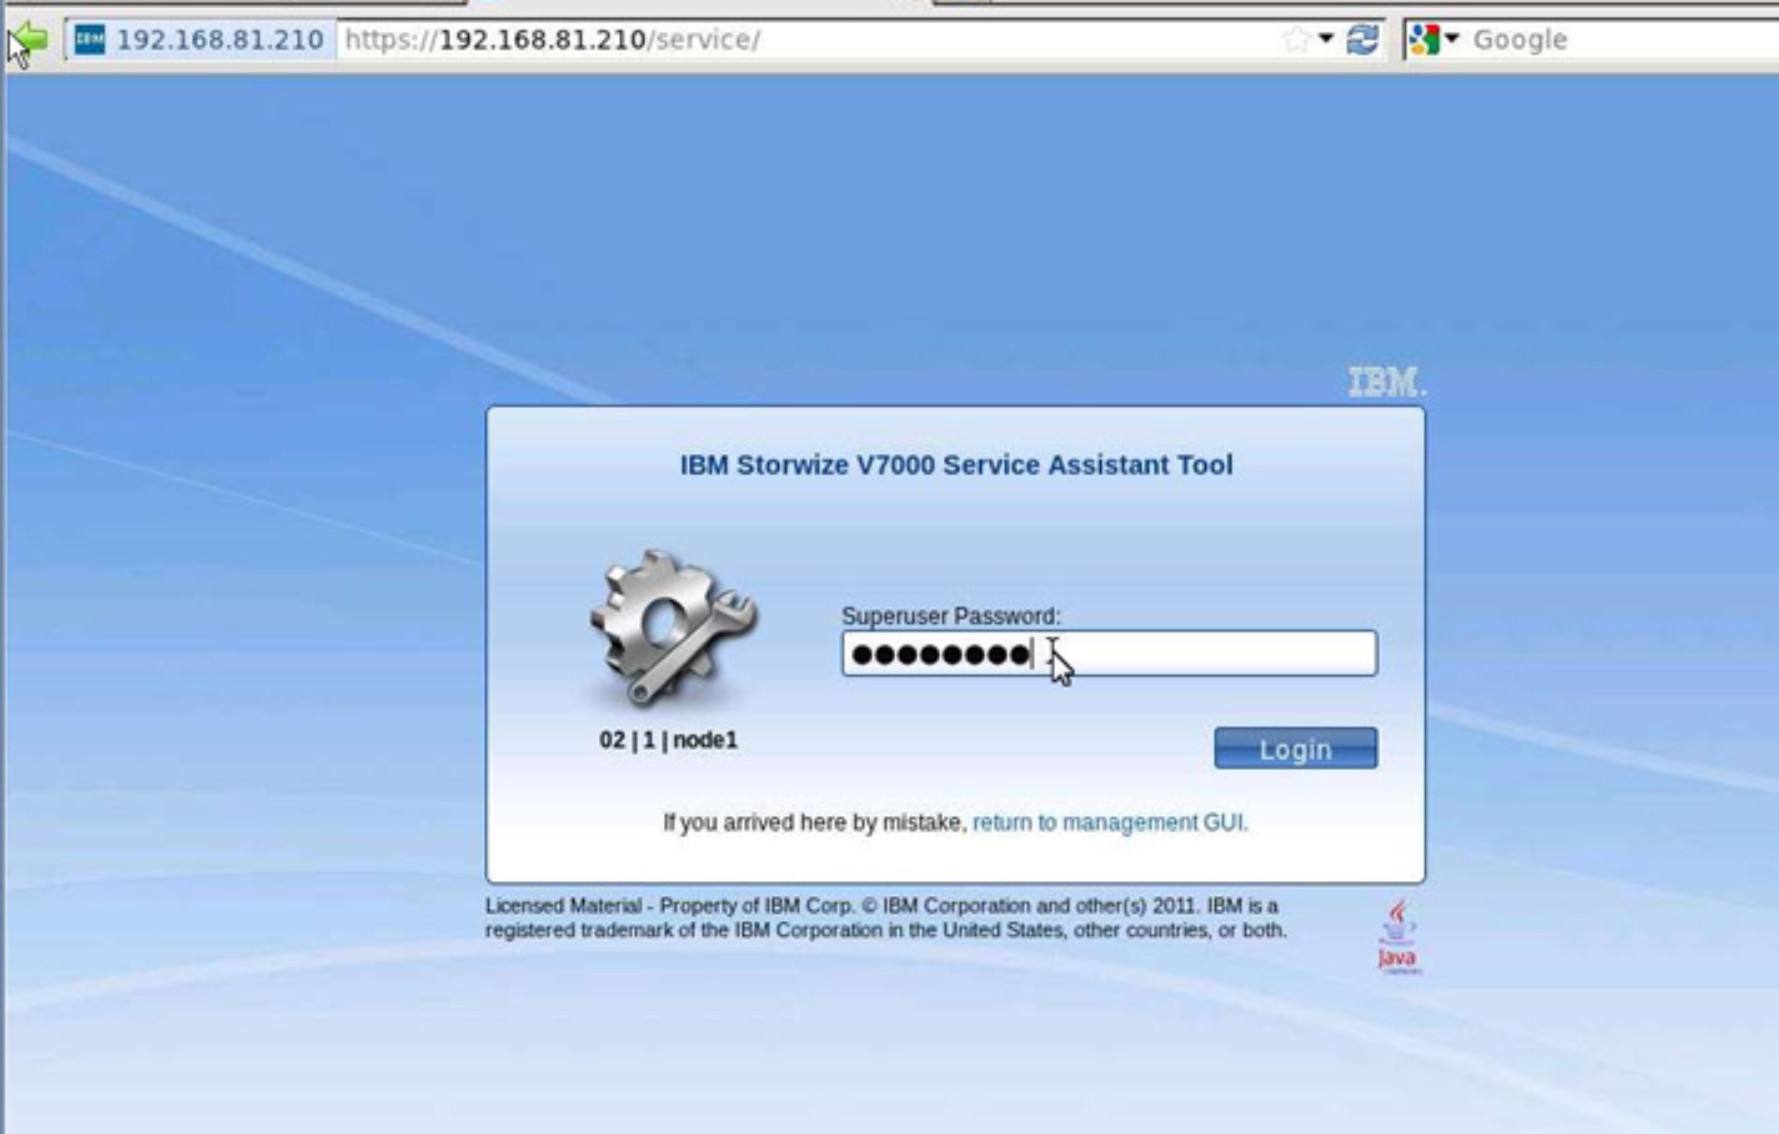 Storwize V7000 Service Assistant Tool sign-in window